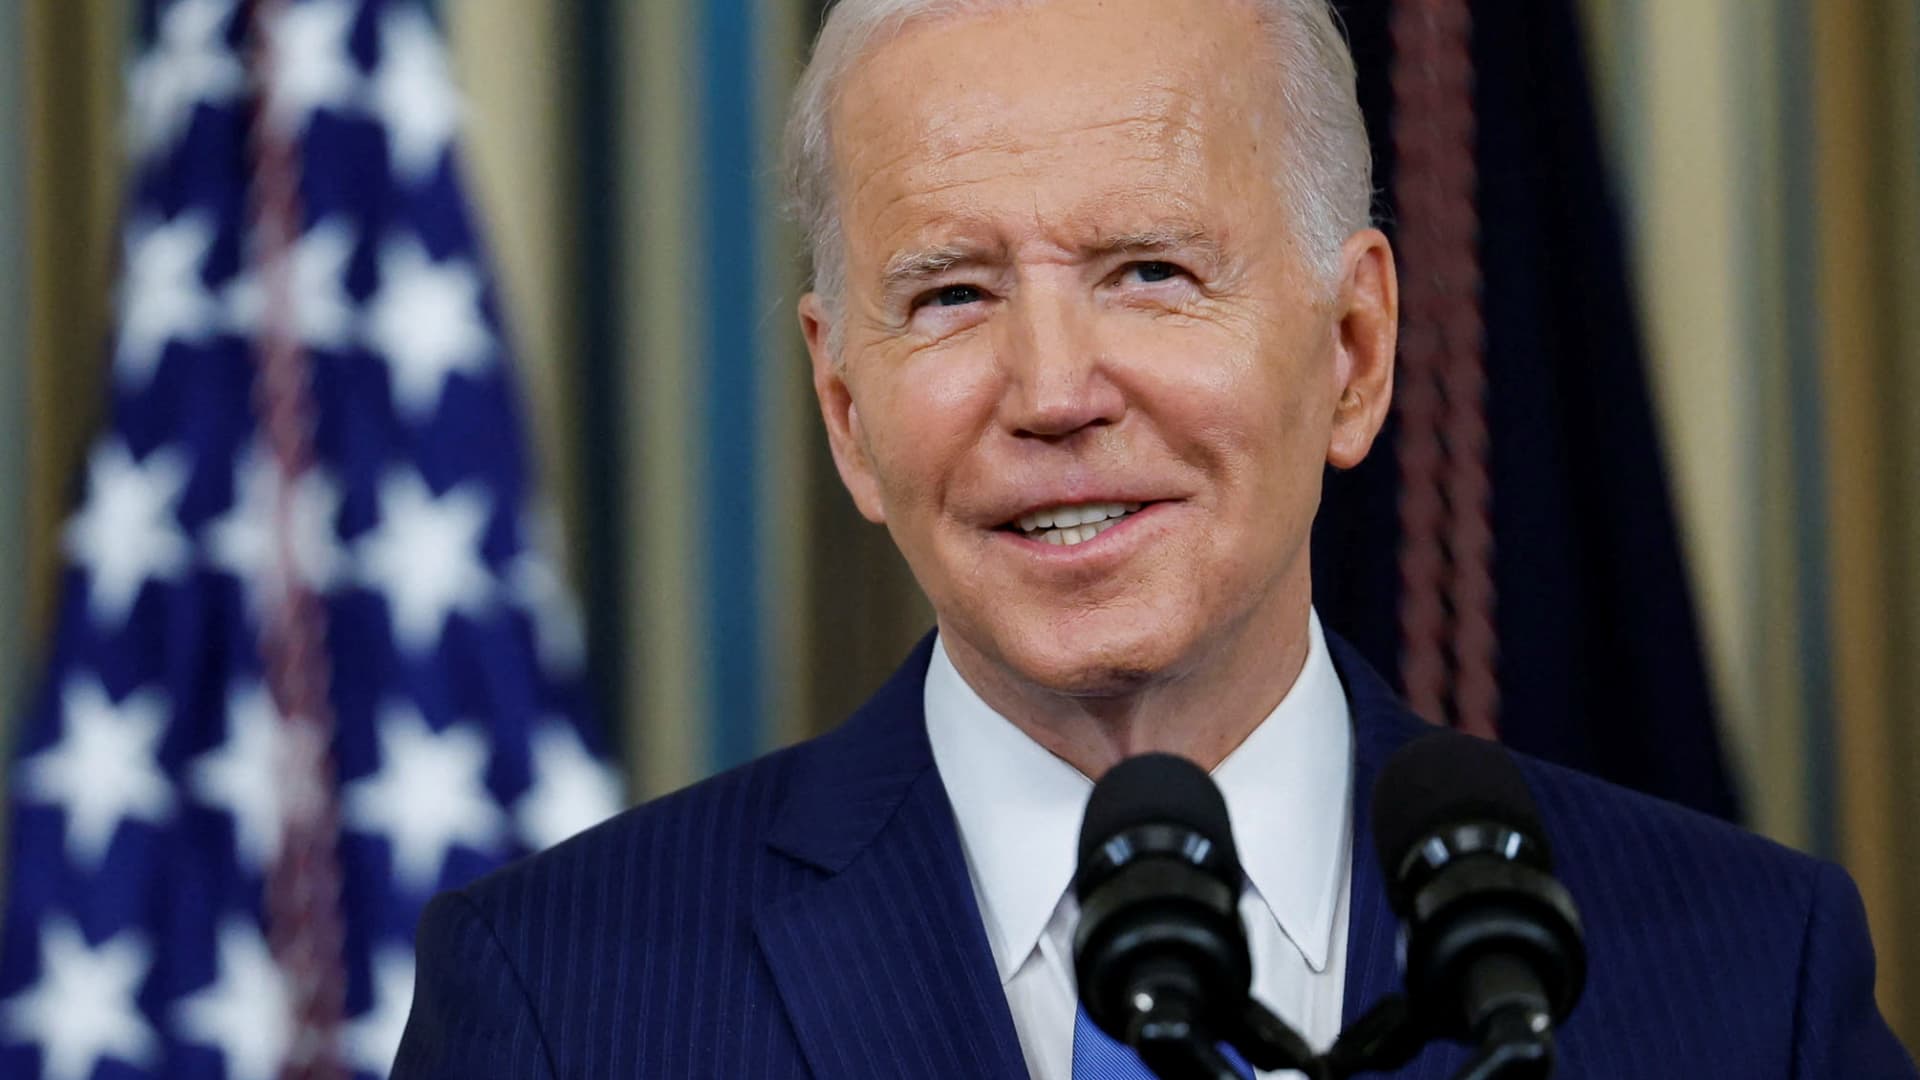 Biden, slamming Putin’s weaponization of fossil fuels, outlines new climate funding pledges